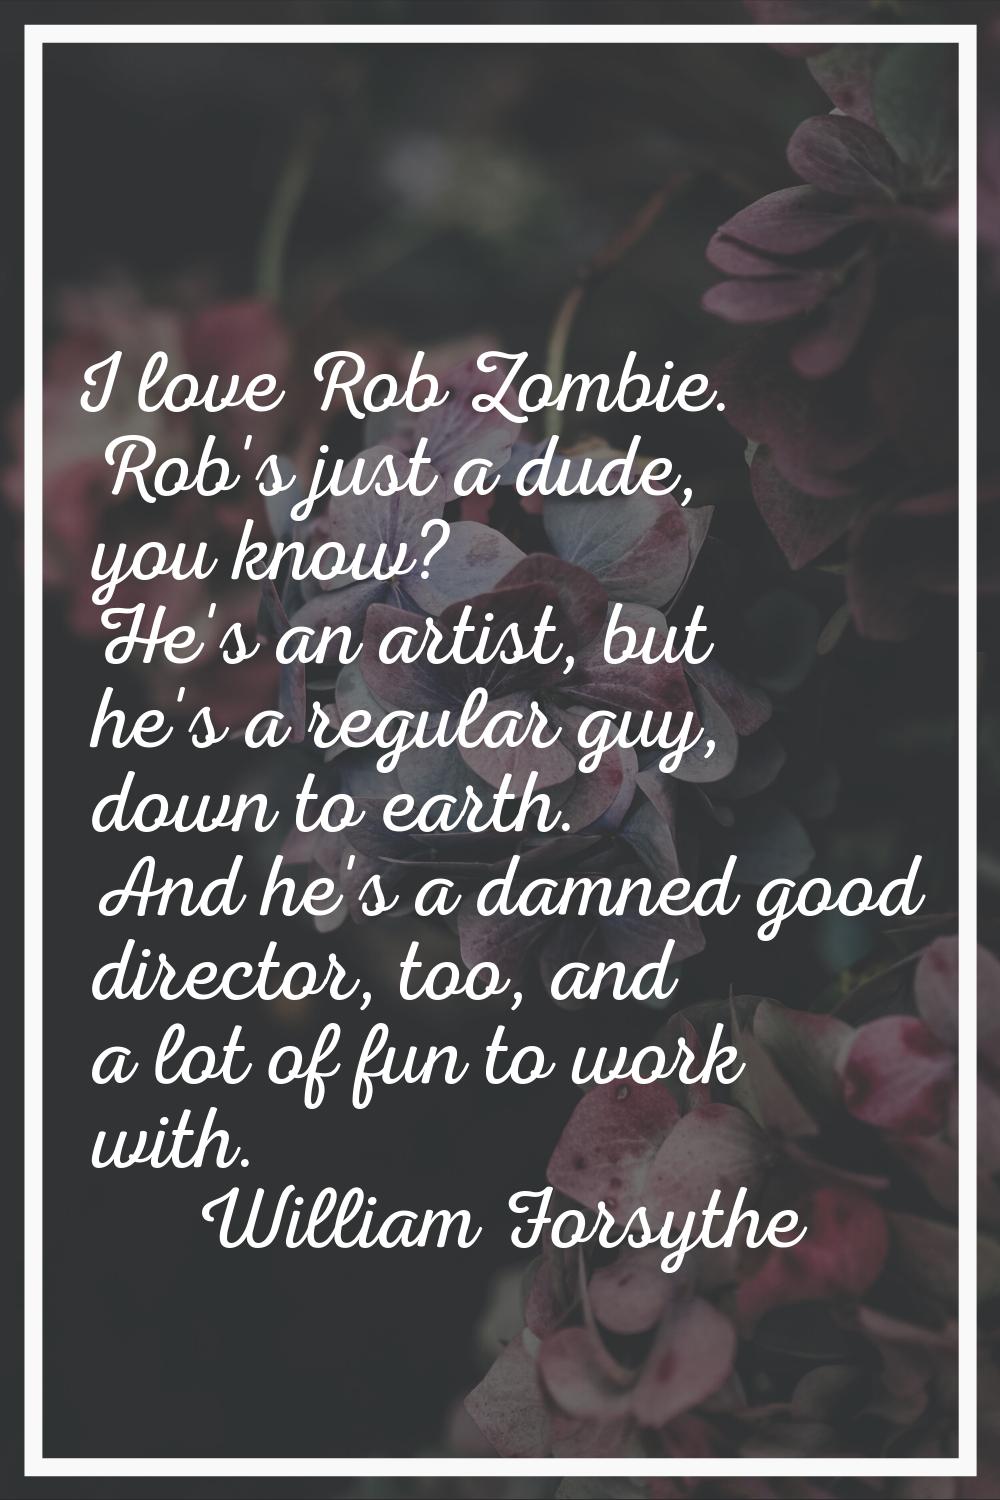 I love Rob Zombie. Rob's just a dude, you know? He's an artist, but he's a regular guy, down to ear